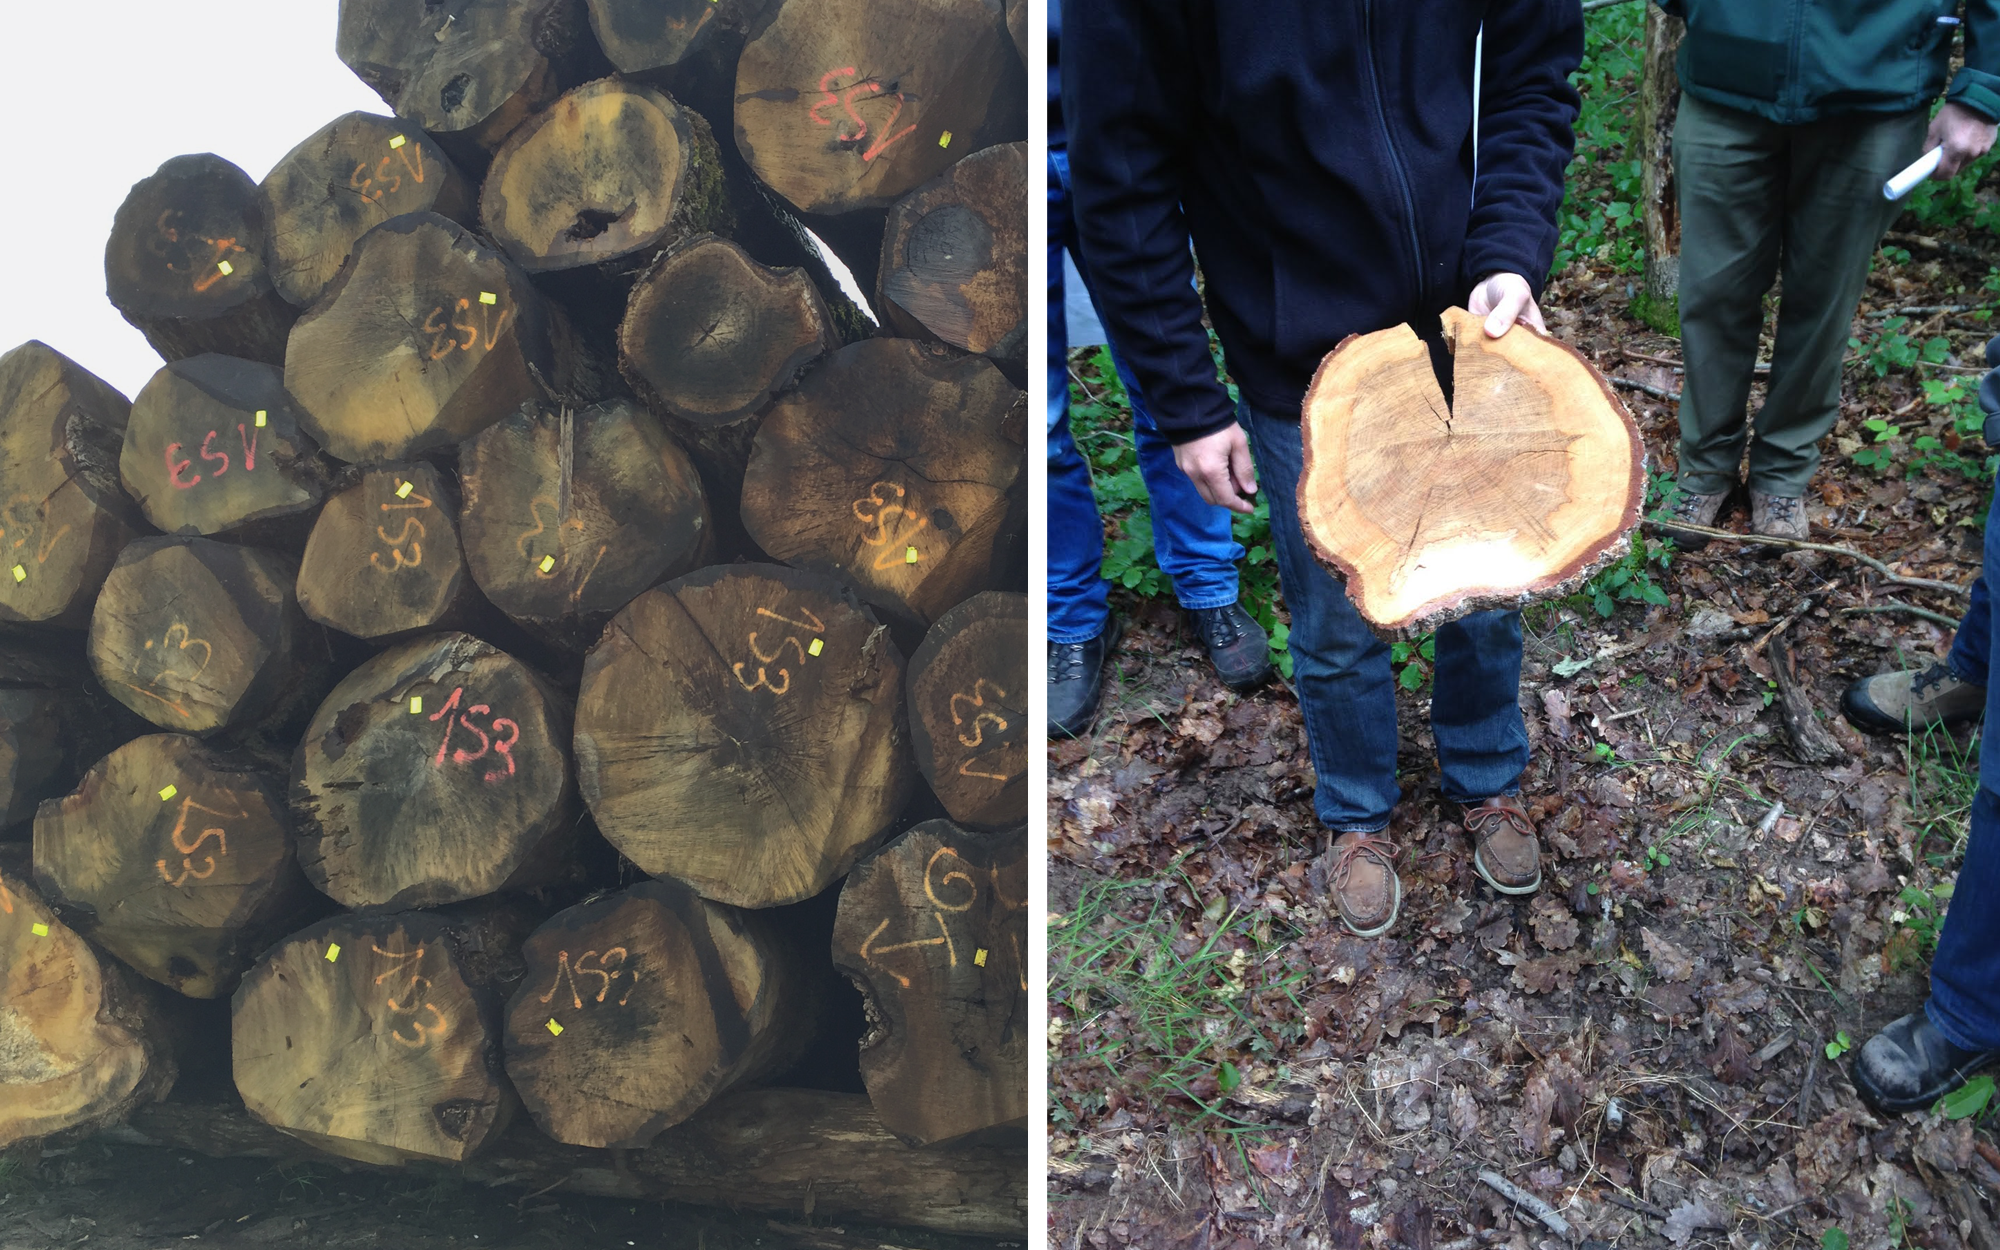 Left: Large oak wood logs stacked in a mill yard; A cut of a tree stump showing the rings & age